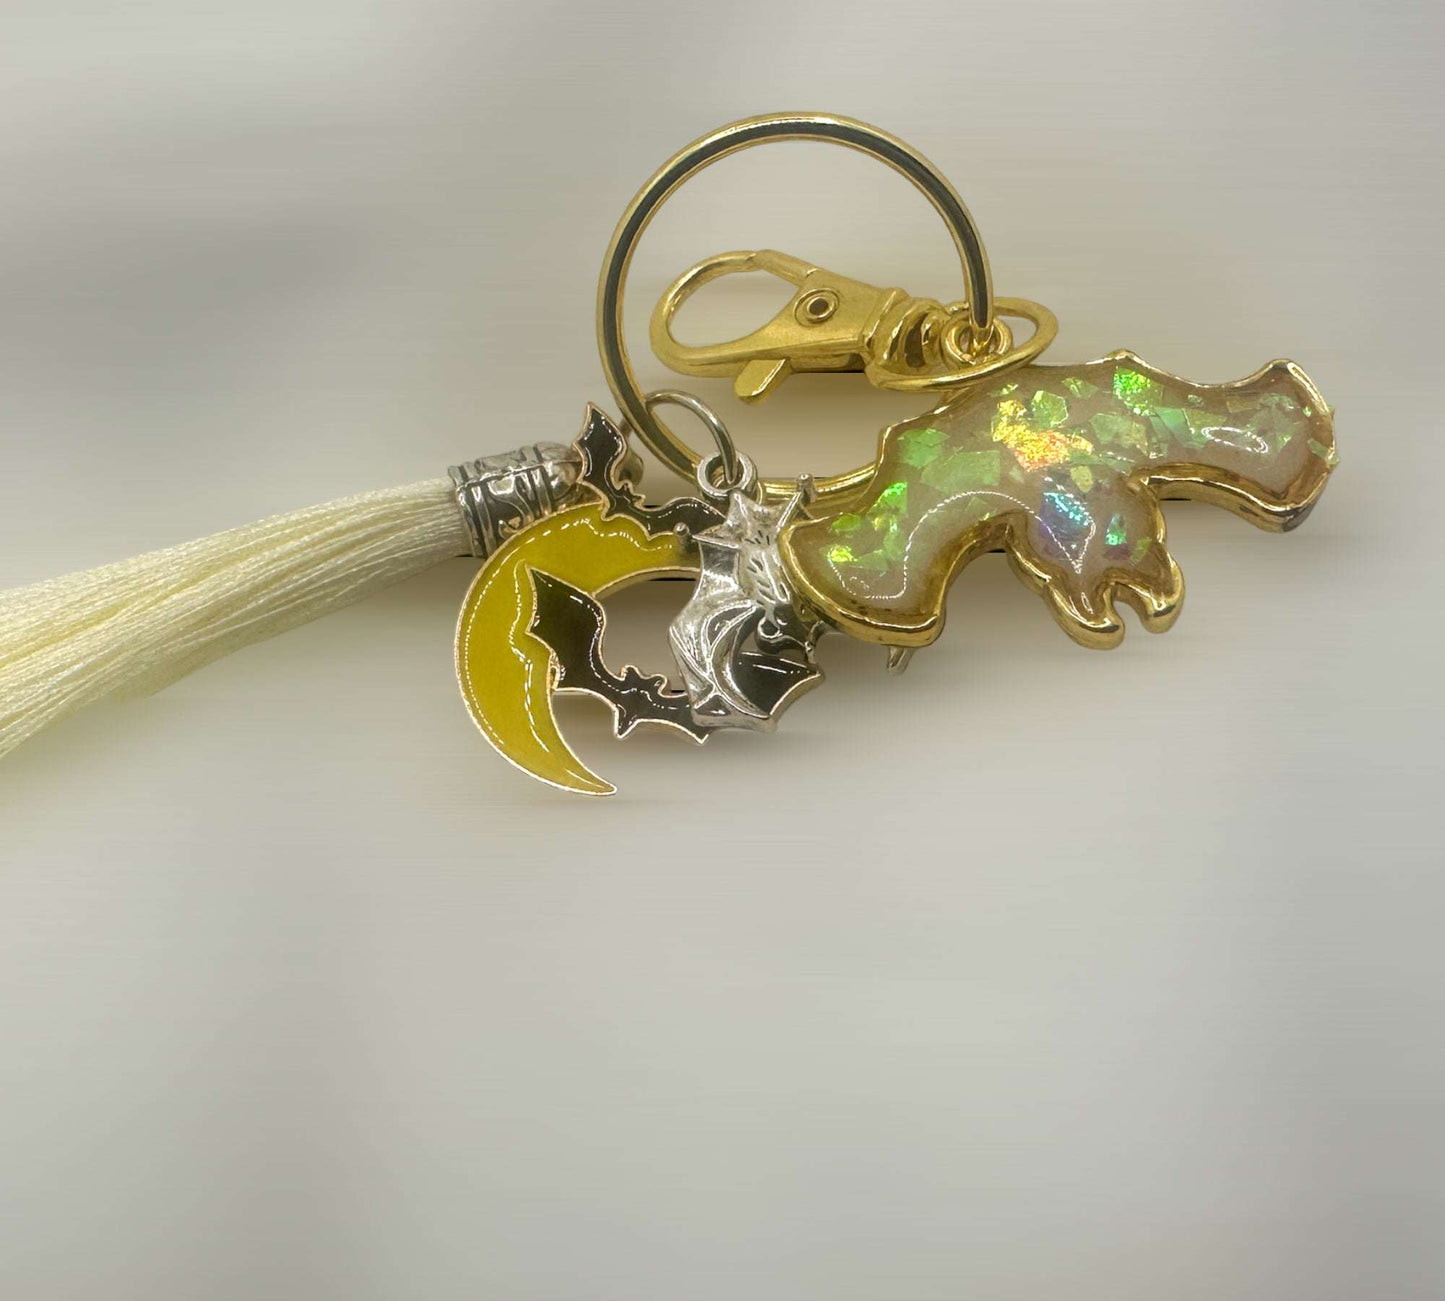 Glow-in-the-Dark Resin Bat Keychains: Handcrafted Nighttime Delights